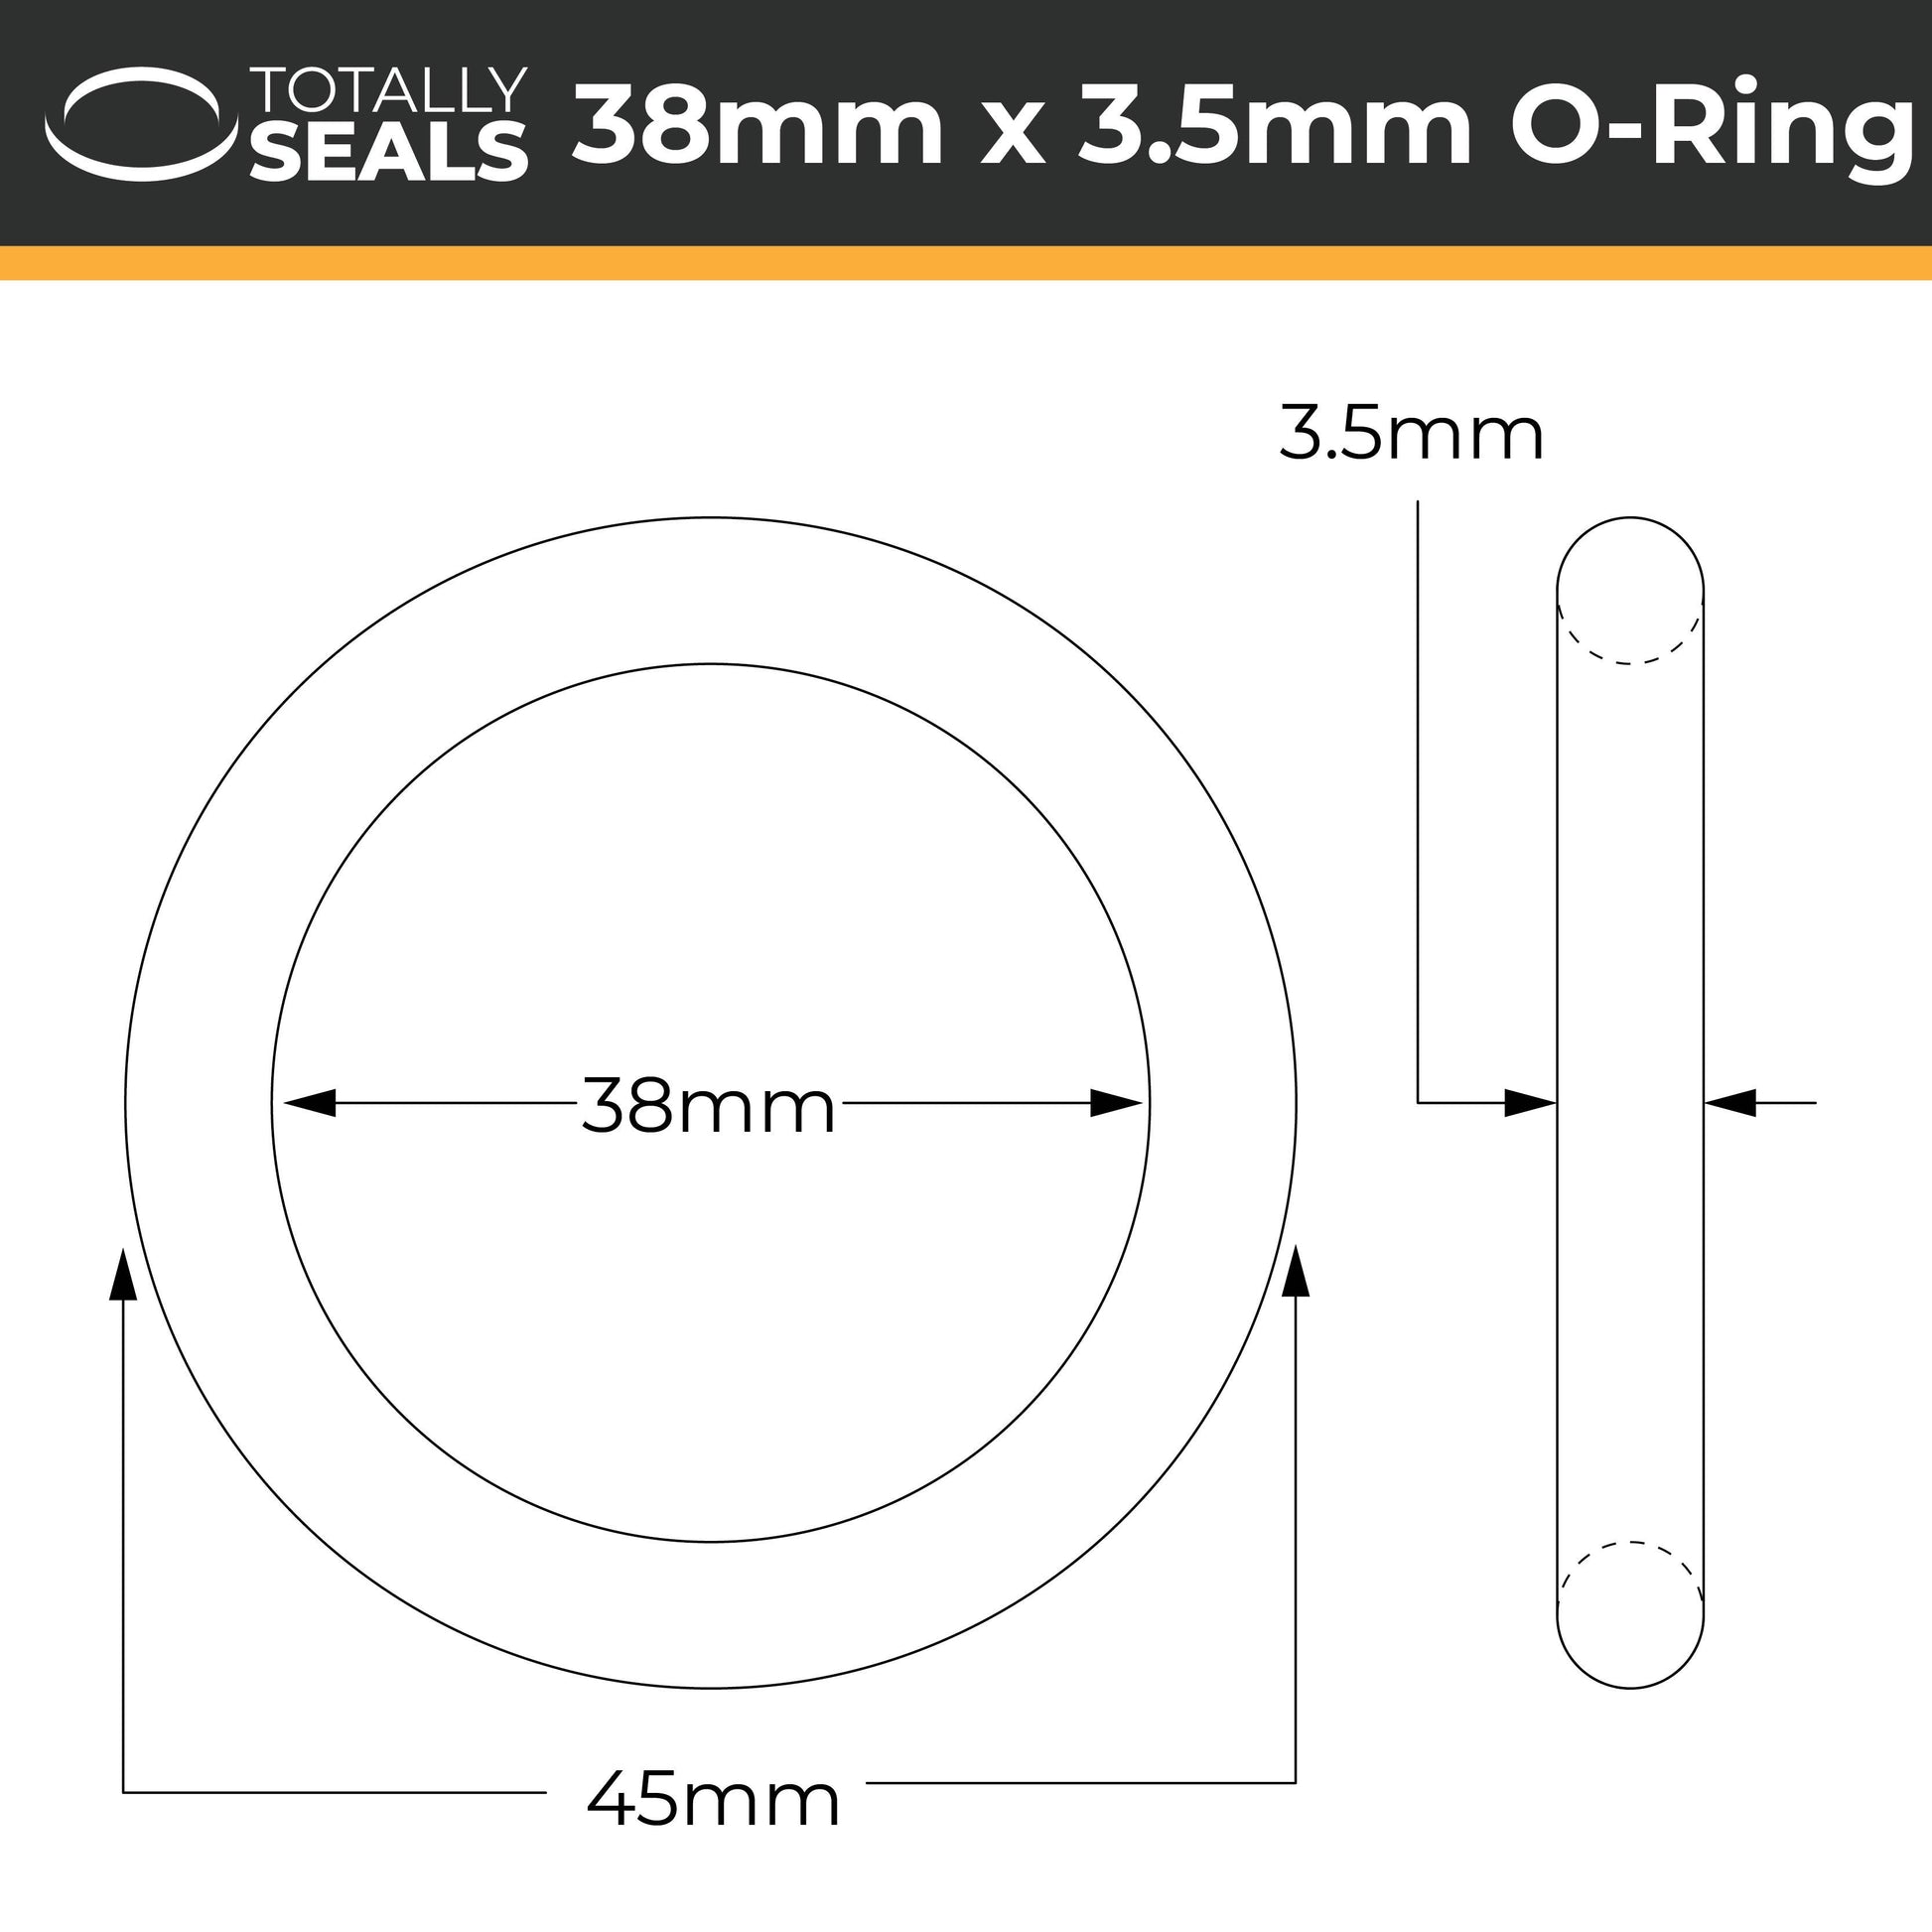 38mm x 3.5mm (45mm OD) Nitrile O-Rings - Totally Seals®